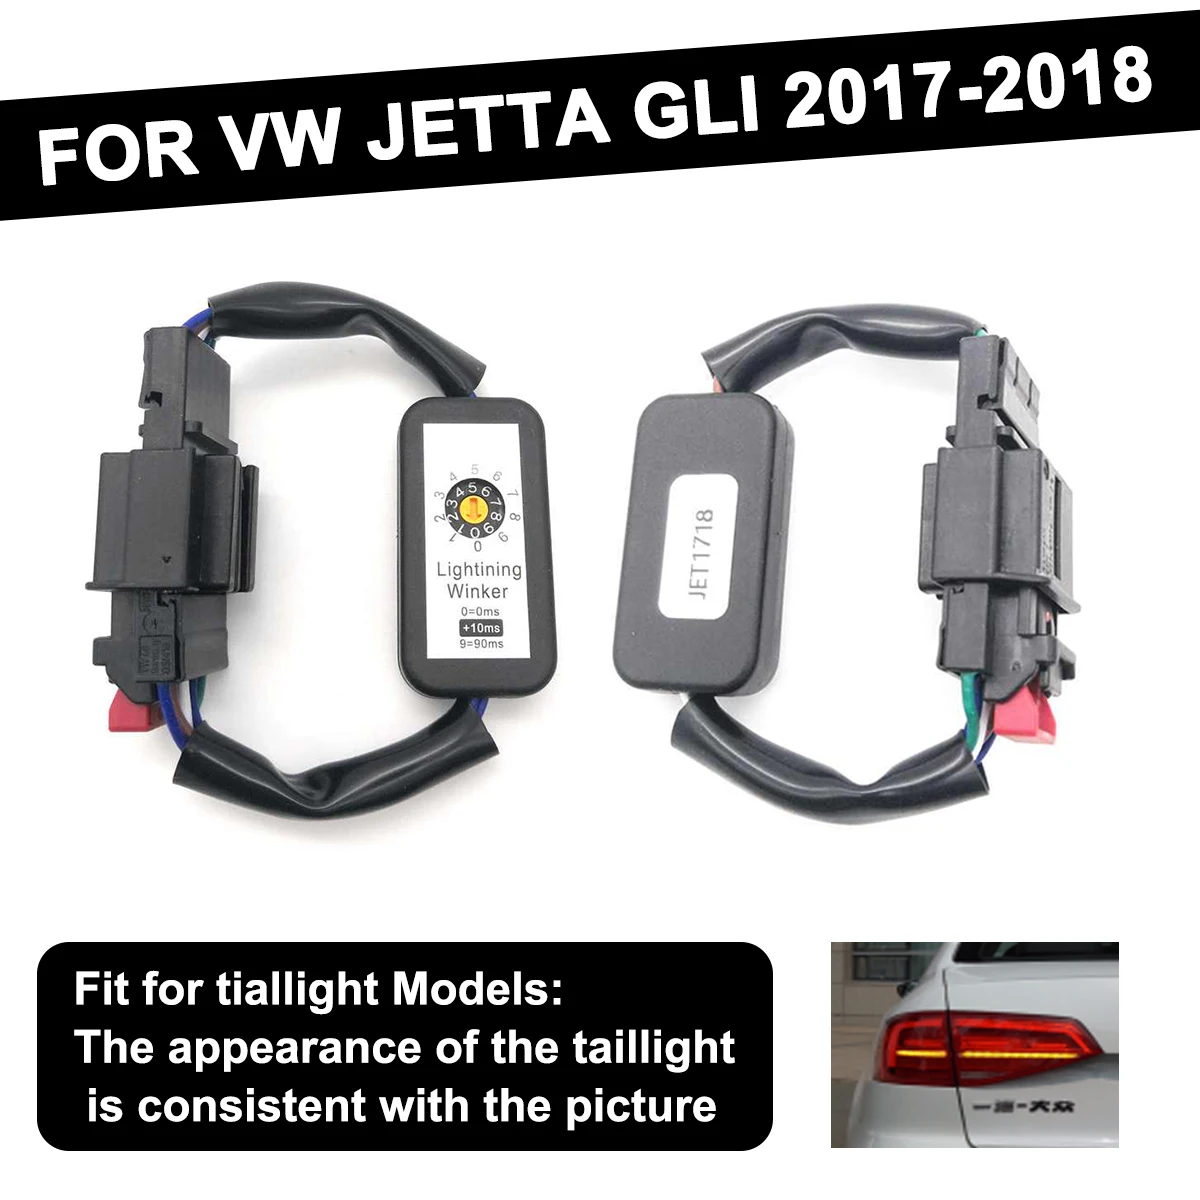 

LED Taillight 2Pcs Black Dynamic Turn Signal Indicator Add-on Module Cable Wire Harness For VW JETTA GLI 2017-2018